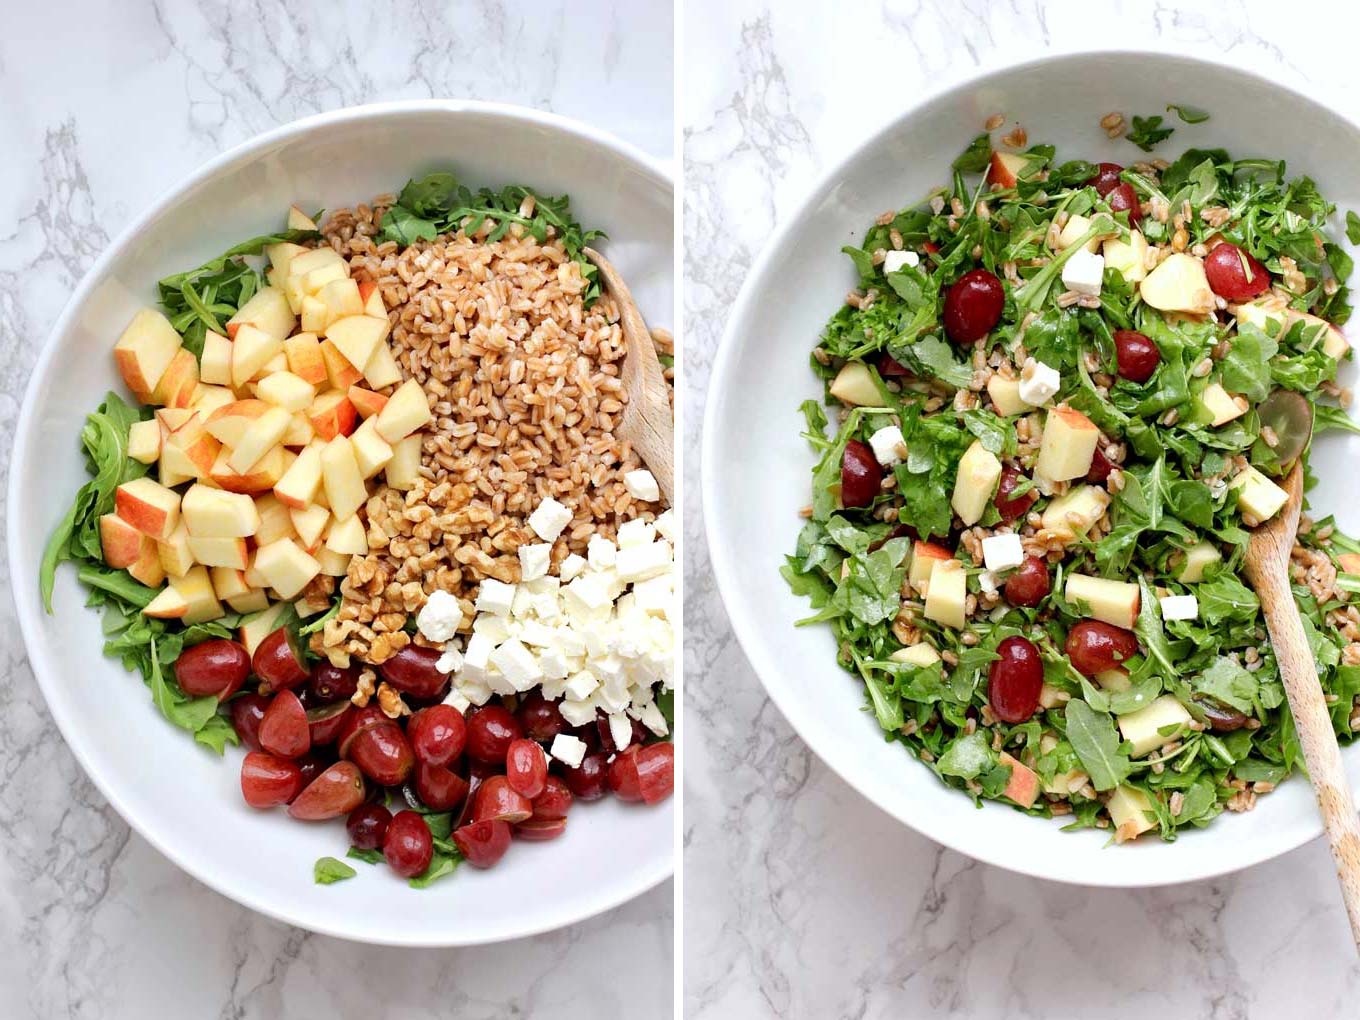 Side by side photos of farro salad ready to toss and farro tossed. In white bowl with a wooden spoon.